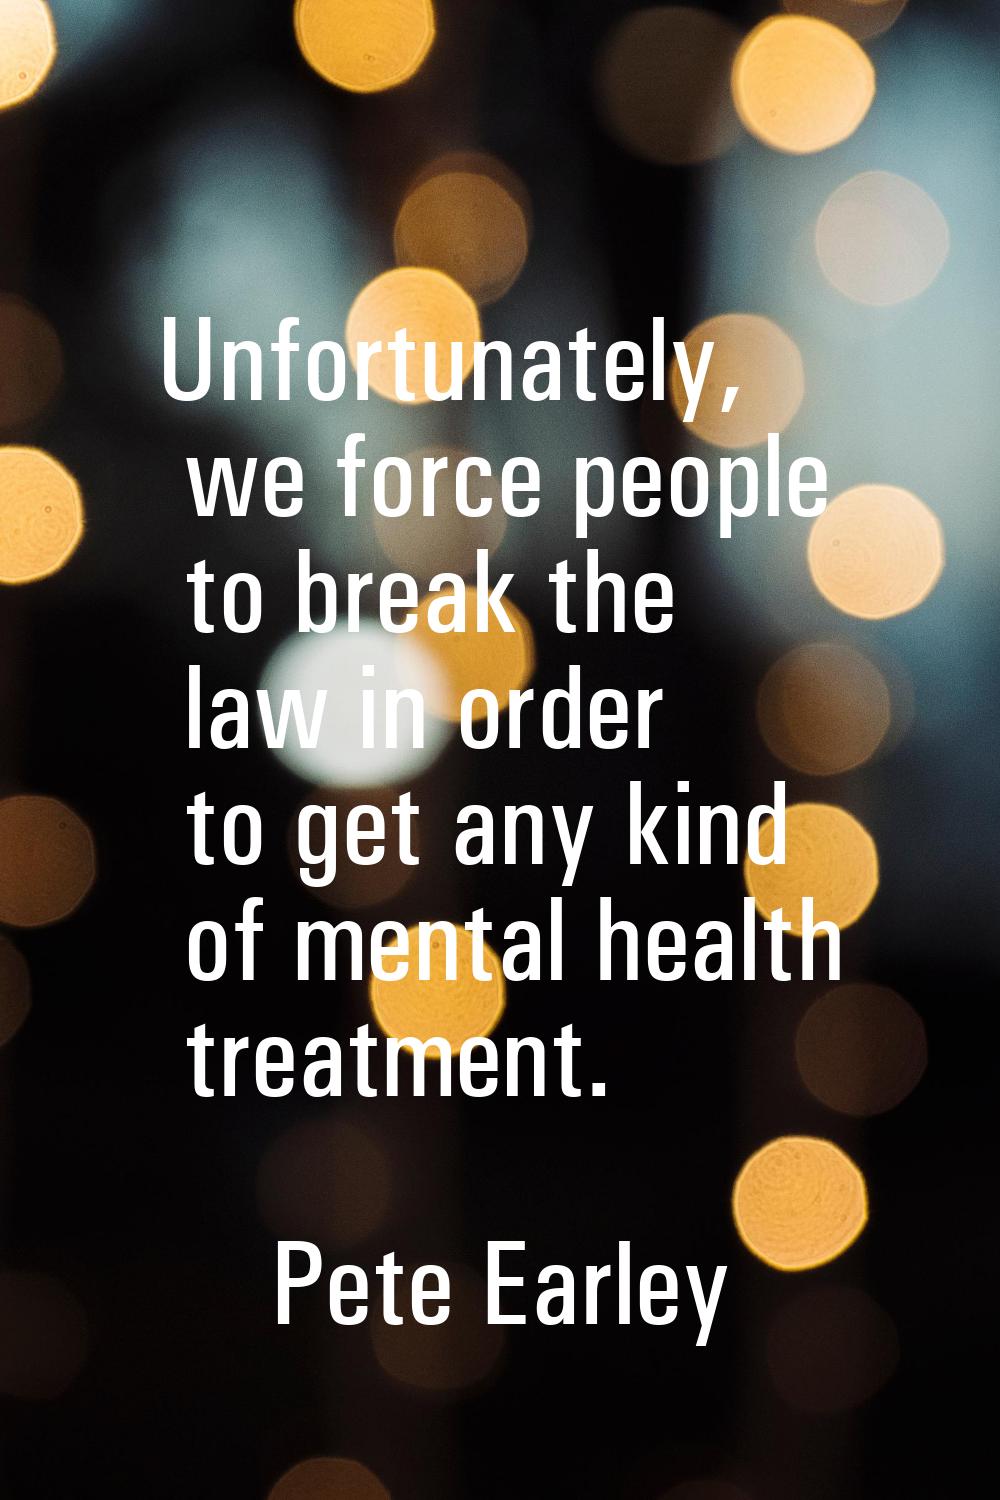 Unfortunately, we force people to break the law in order to get any kind of mental health treatment